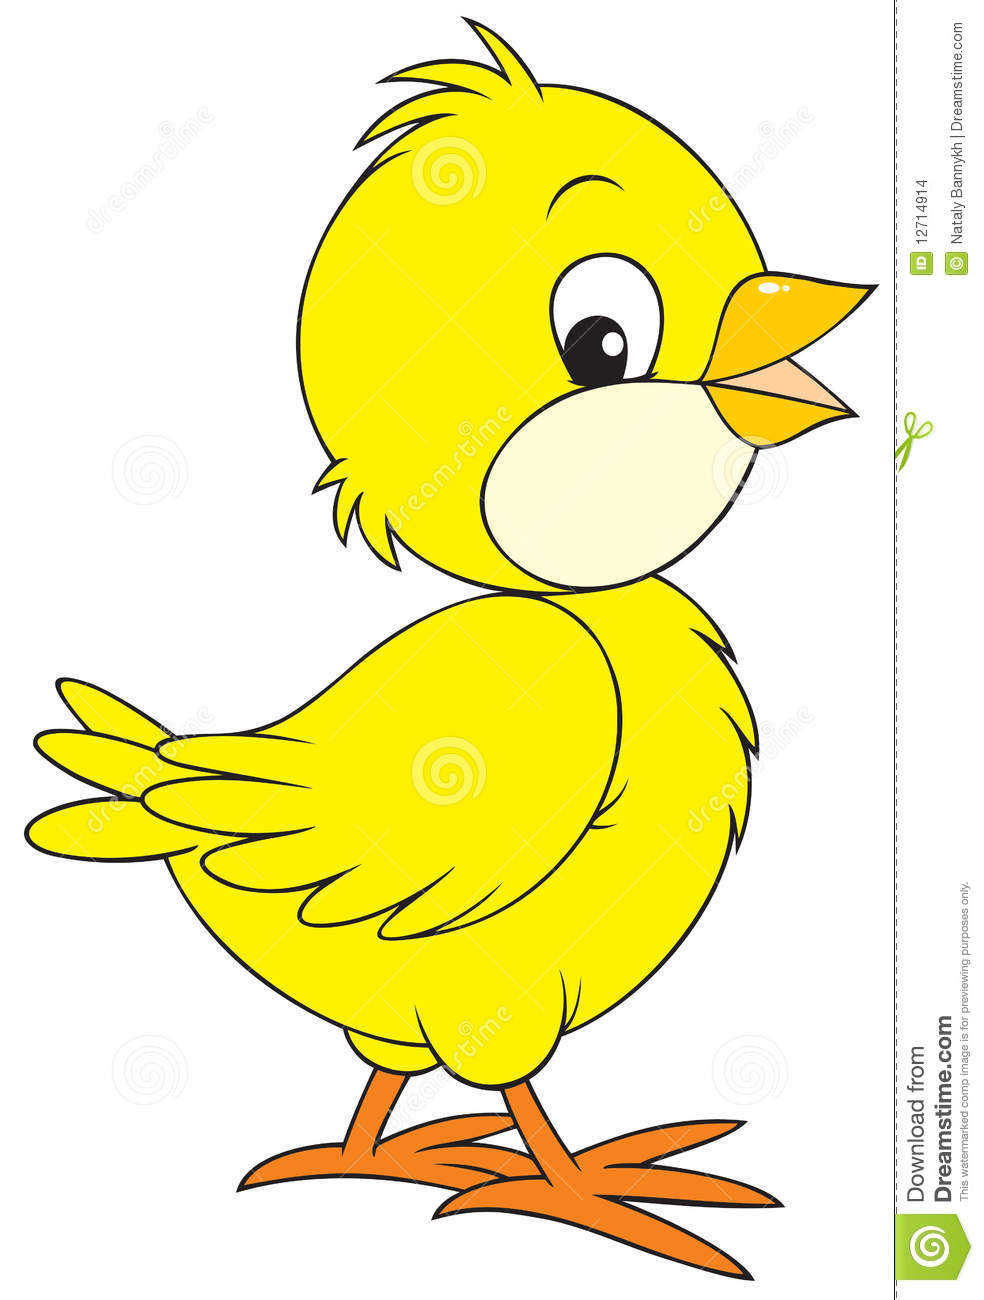 Yellow Chick Clipart.